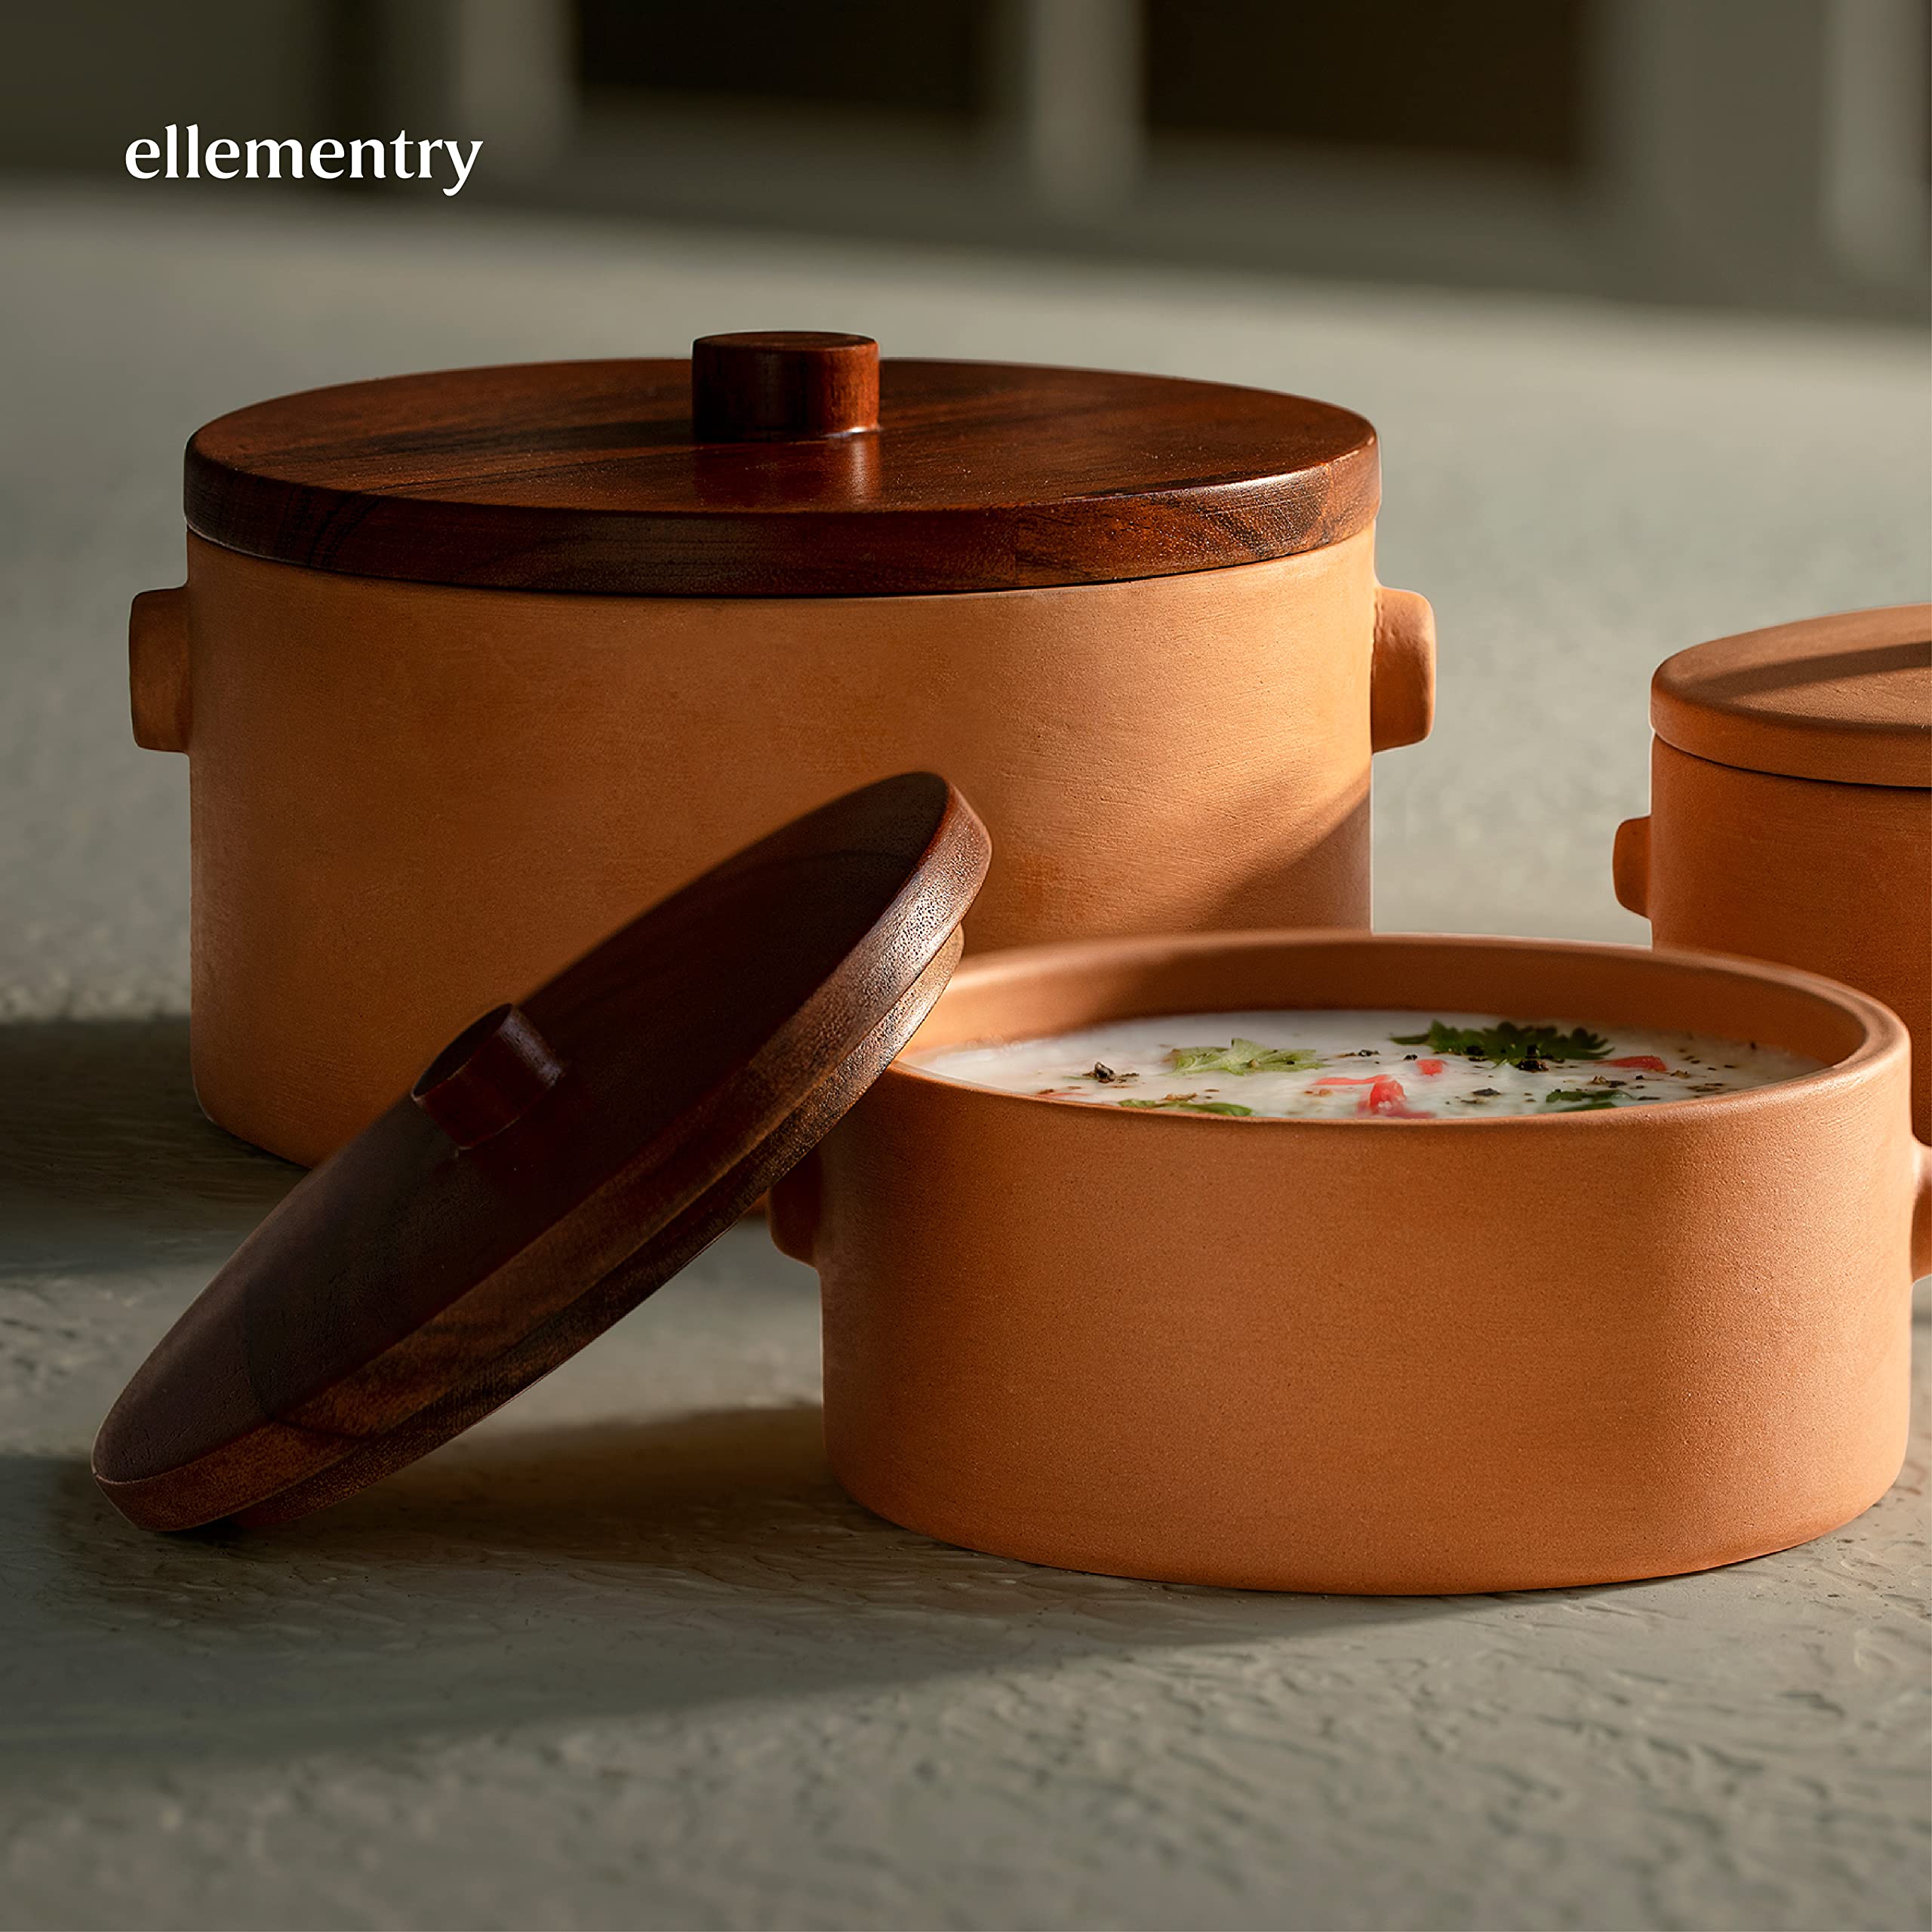 ellementry knurl curd setter - small| | with lid | Colour: Terracotta Red | Terracotta | Serving Bowl | 400ml | Handcrafted | Sustainable | Food Safe | Gifting |